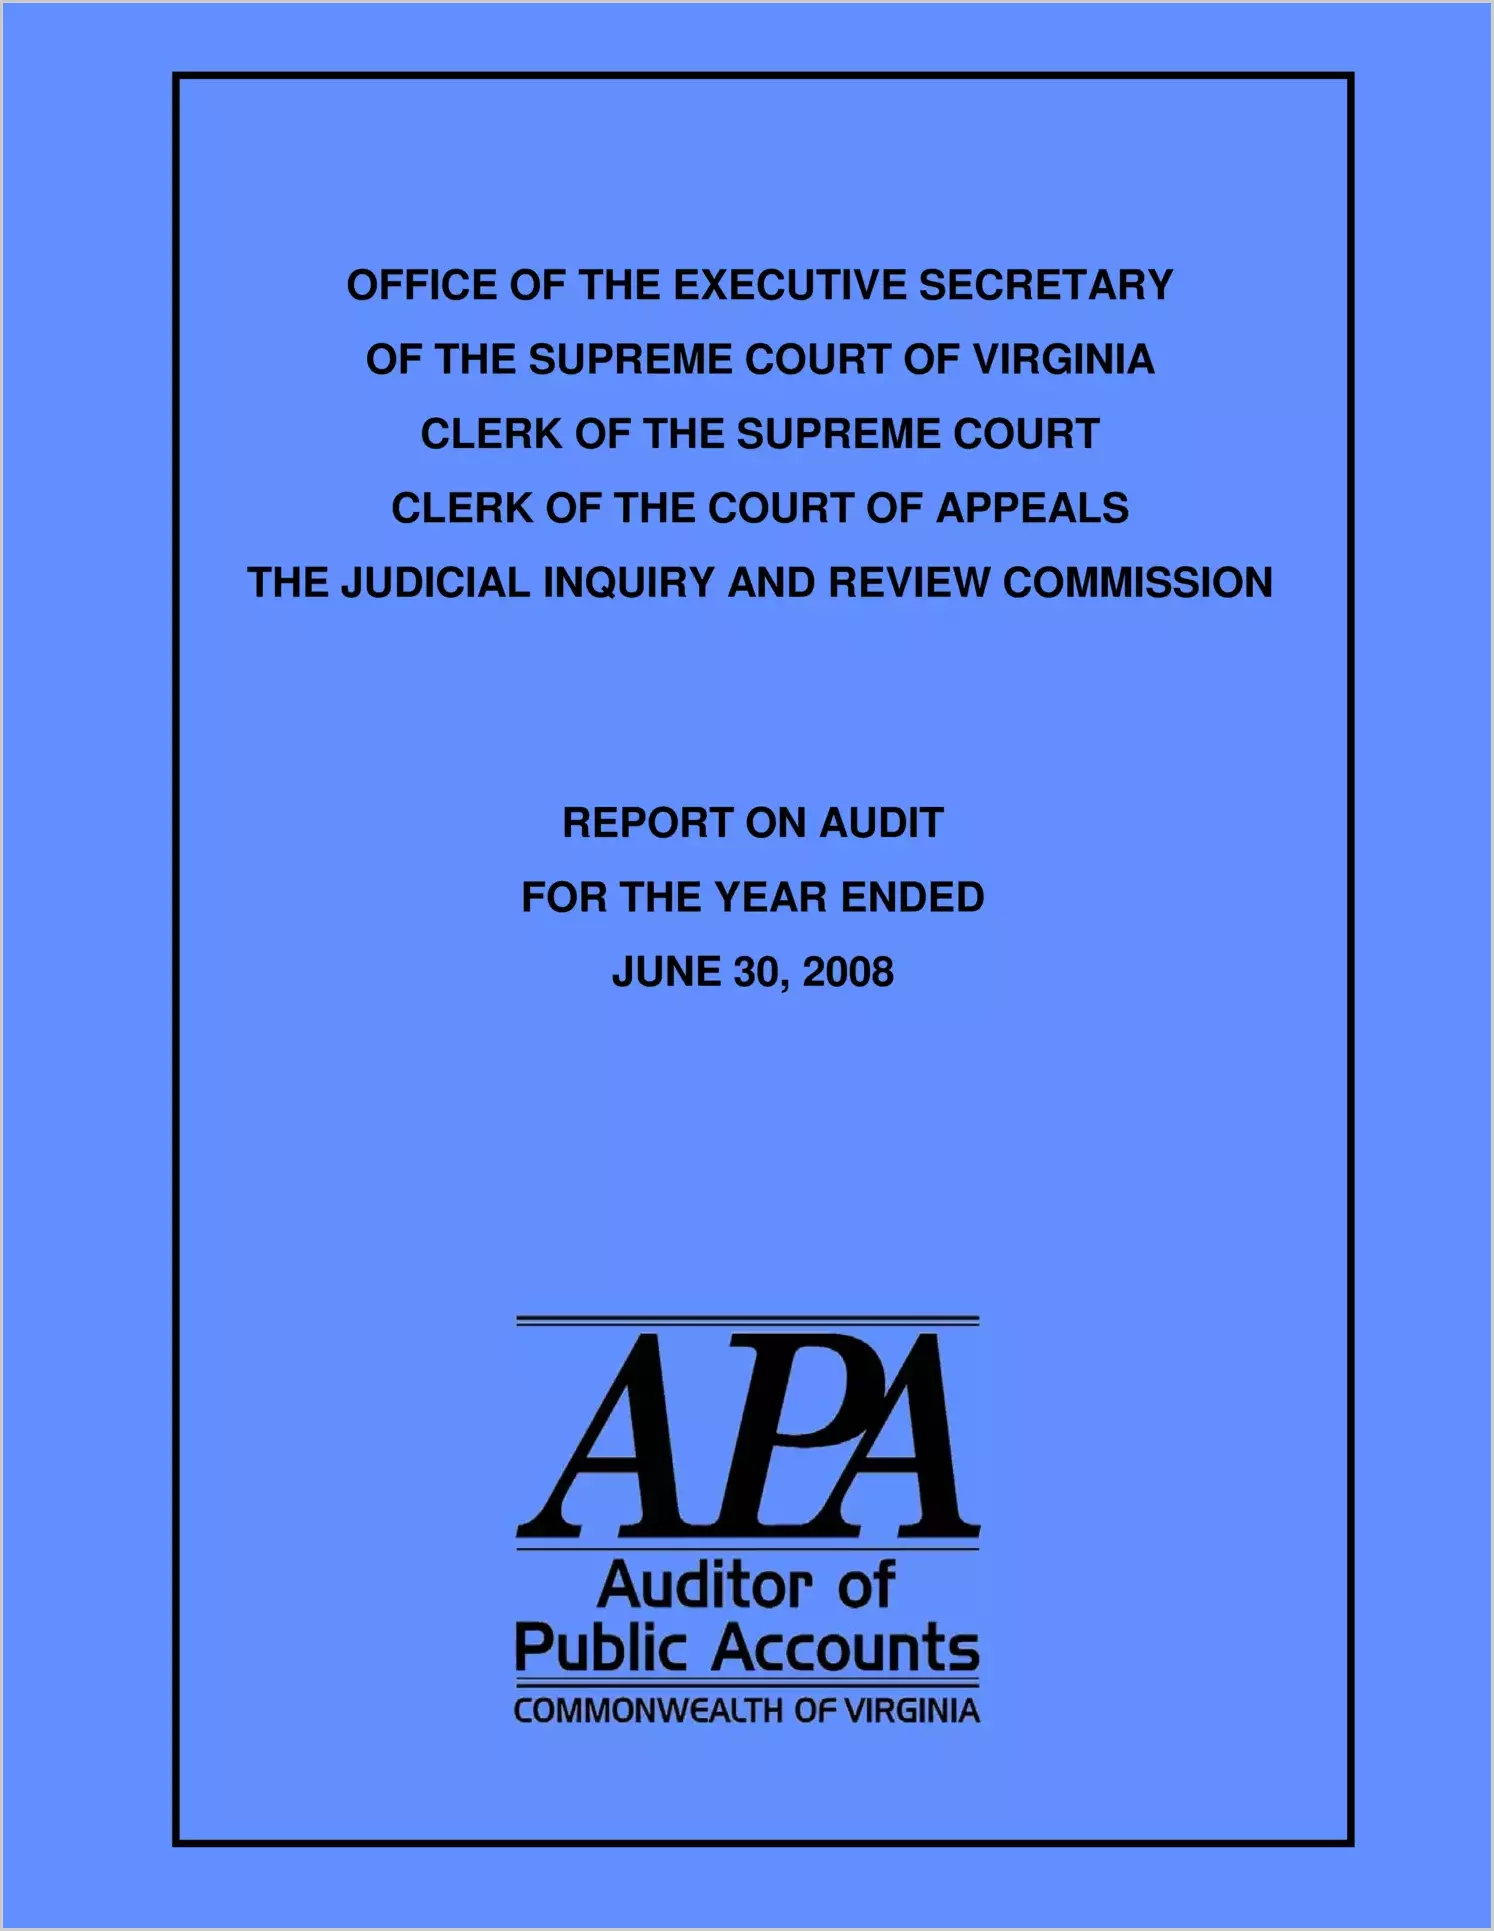 Office of the Executive Secretary of the Supreme Court of Virginia, Clerk of the Supreme Court, Clerk of the Court of Appeals, and The Judicial Inquiry and Review Commission report on audit fo rthe year ended June 30, 2007